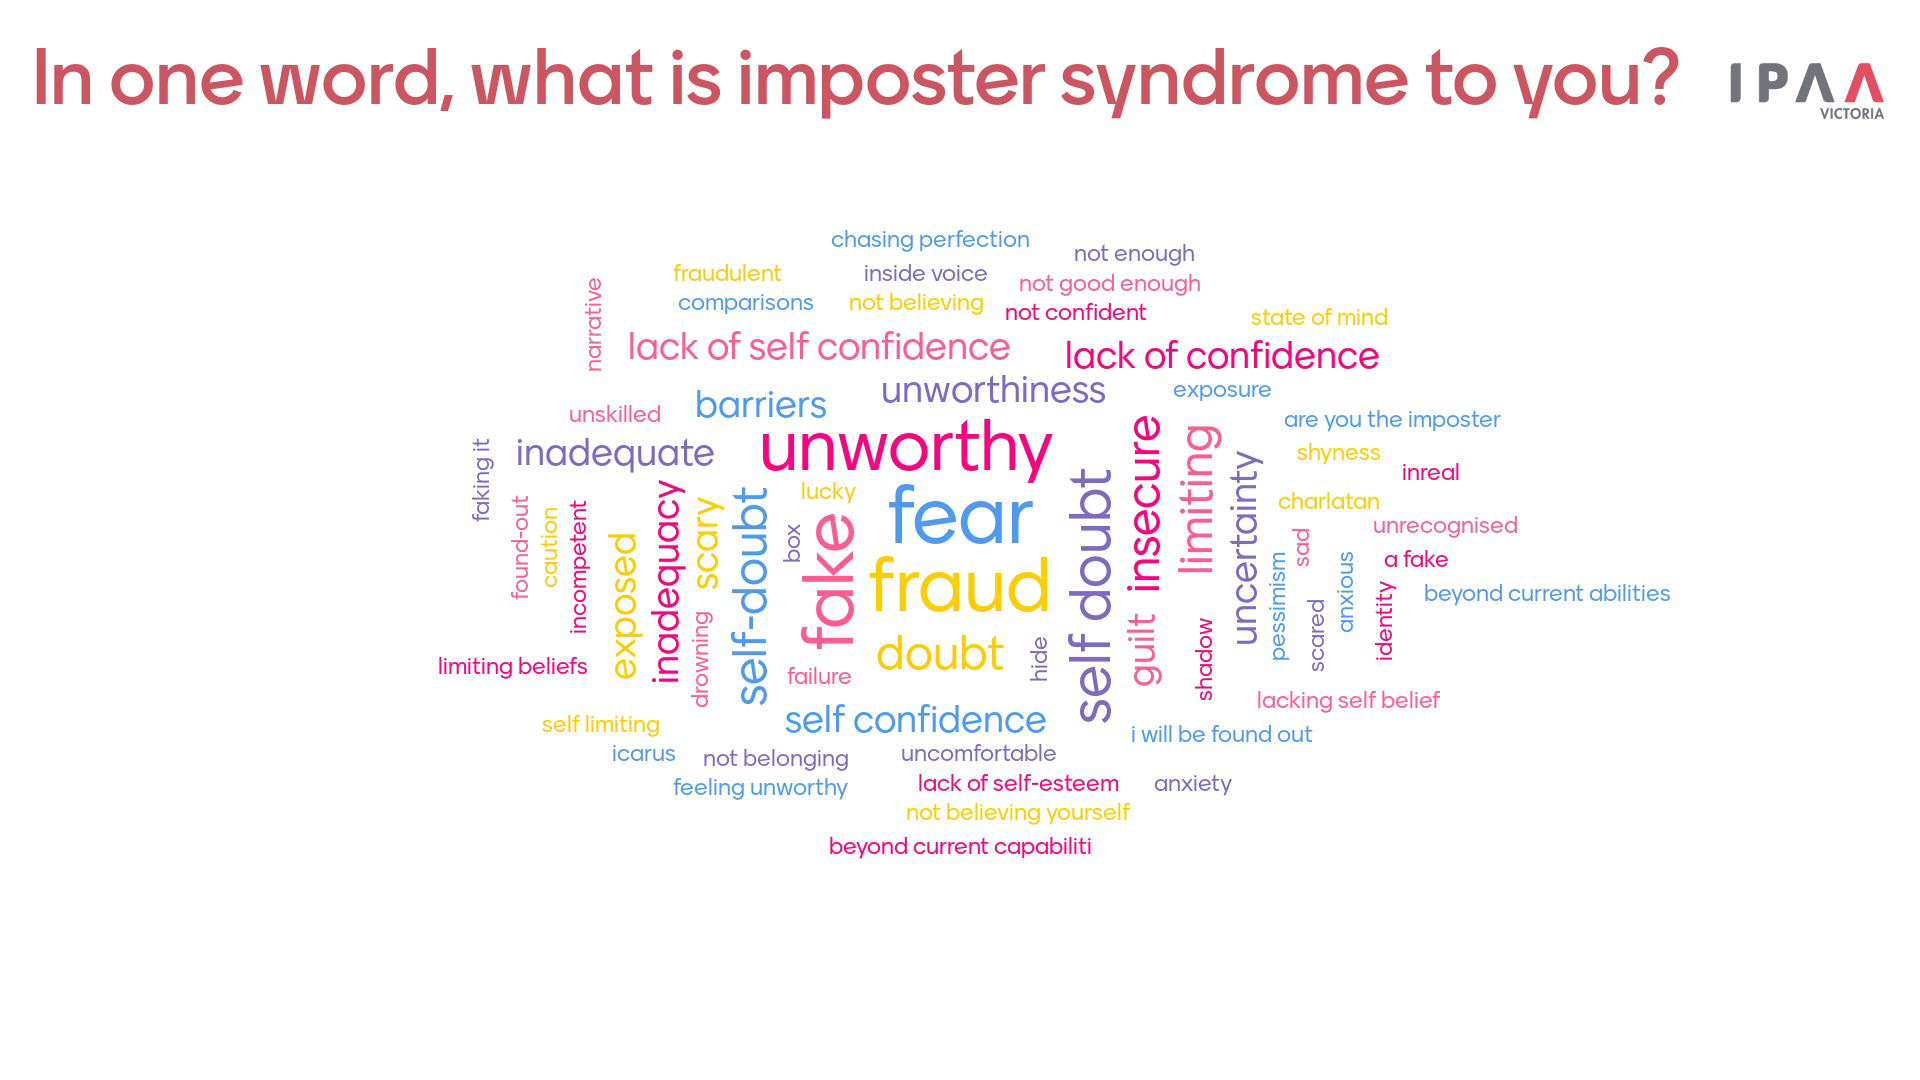 Overcoming Imposter Syndrome question 1